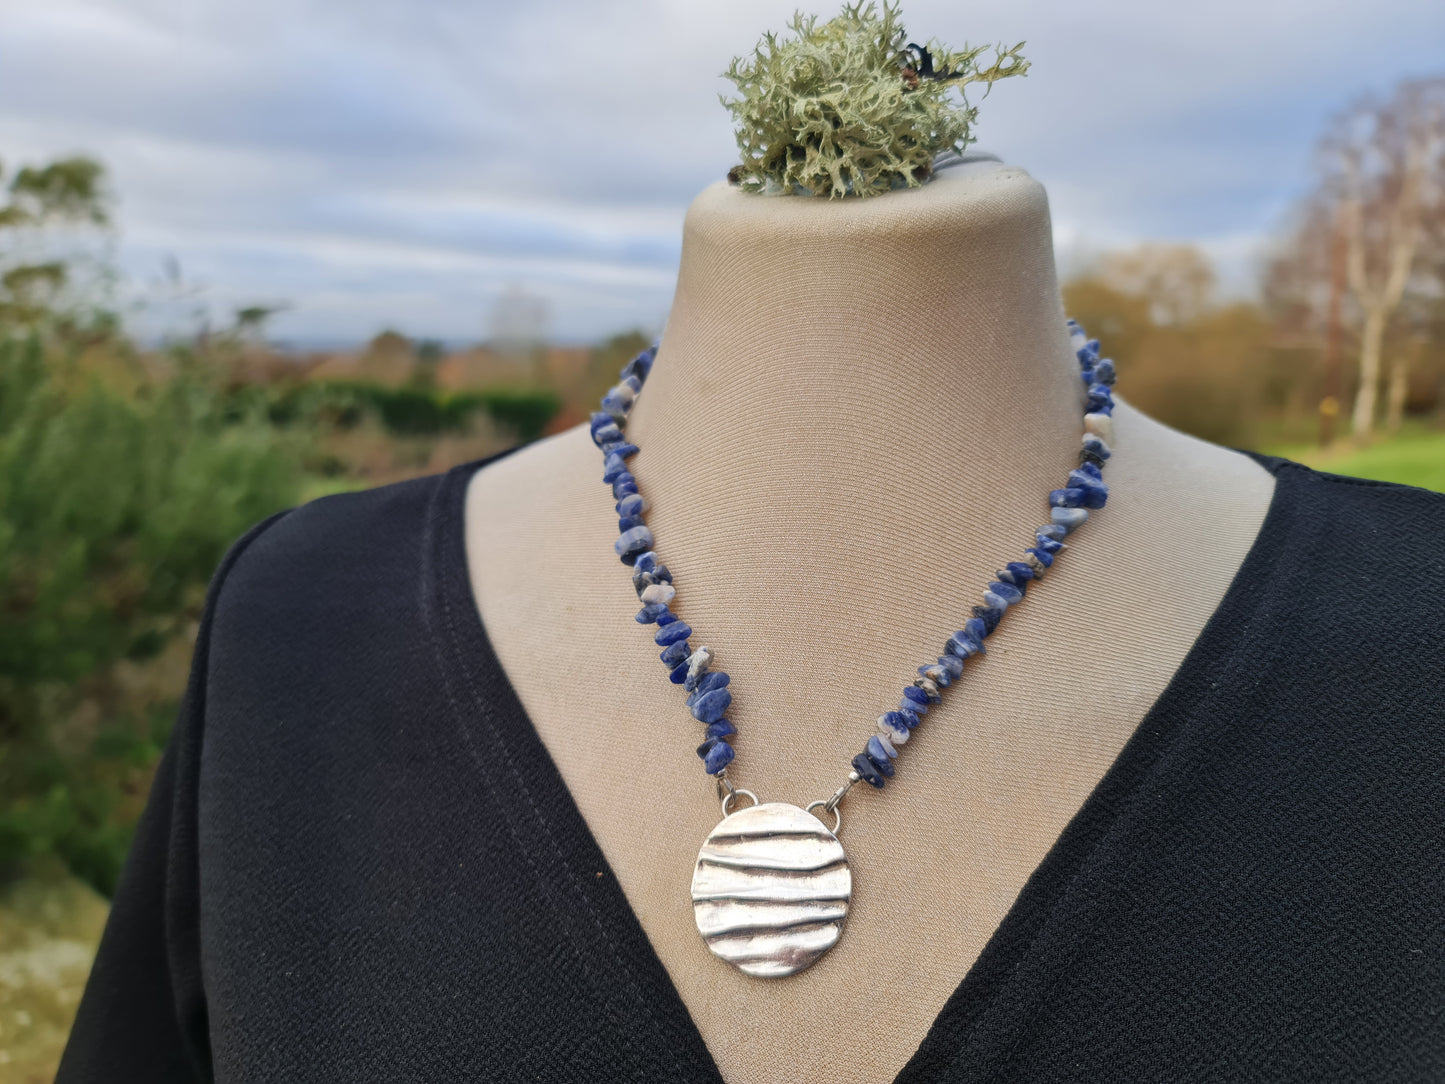 Handmade solid silver 3 mm disc with a ripple texture and blue sodalite beads round the neck.  The pendant is shown on a mannequin wearing a black dress with a country garden background.